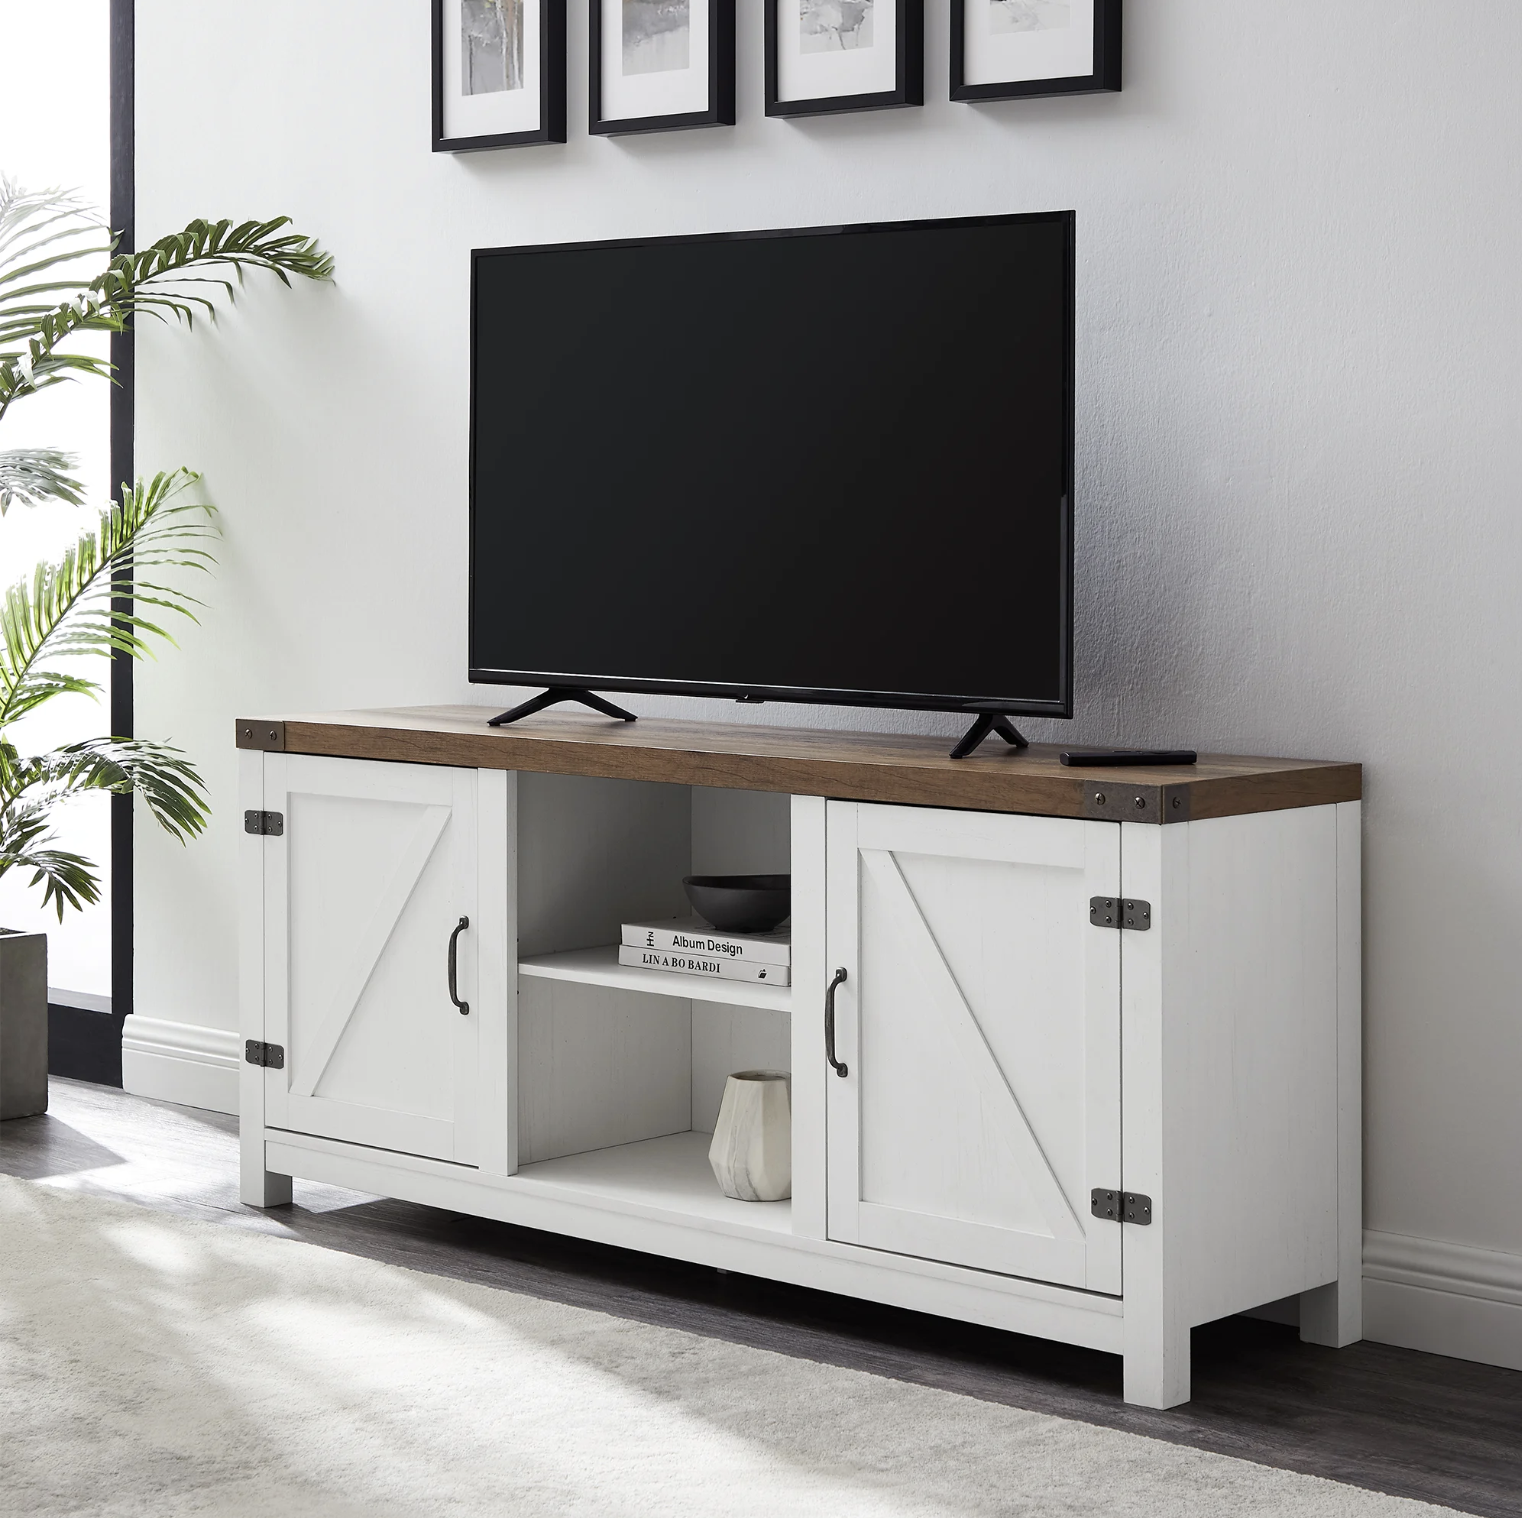 The TV stand with a flat screen TV on top and books on the shelves